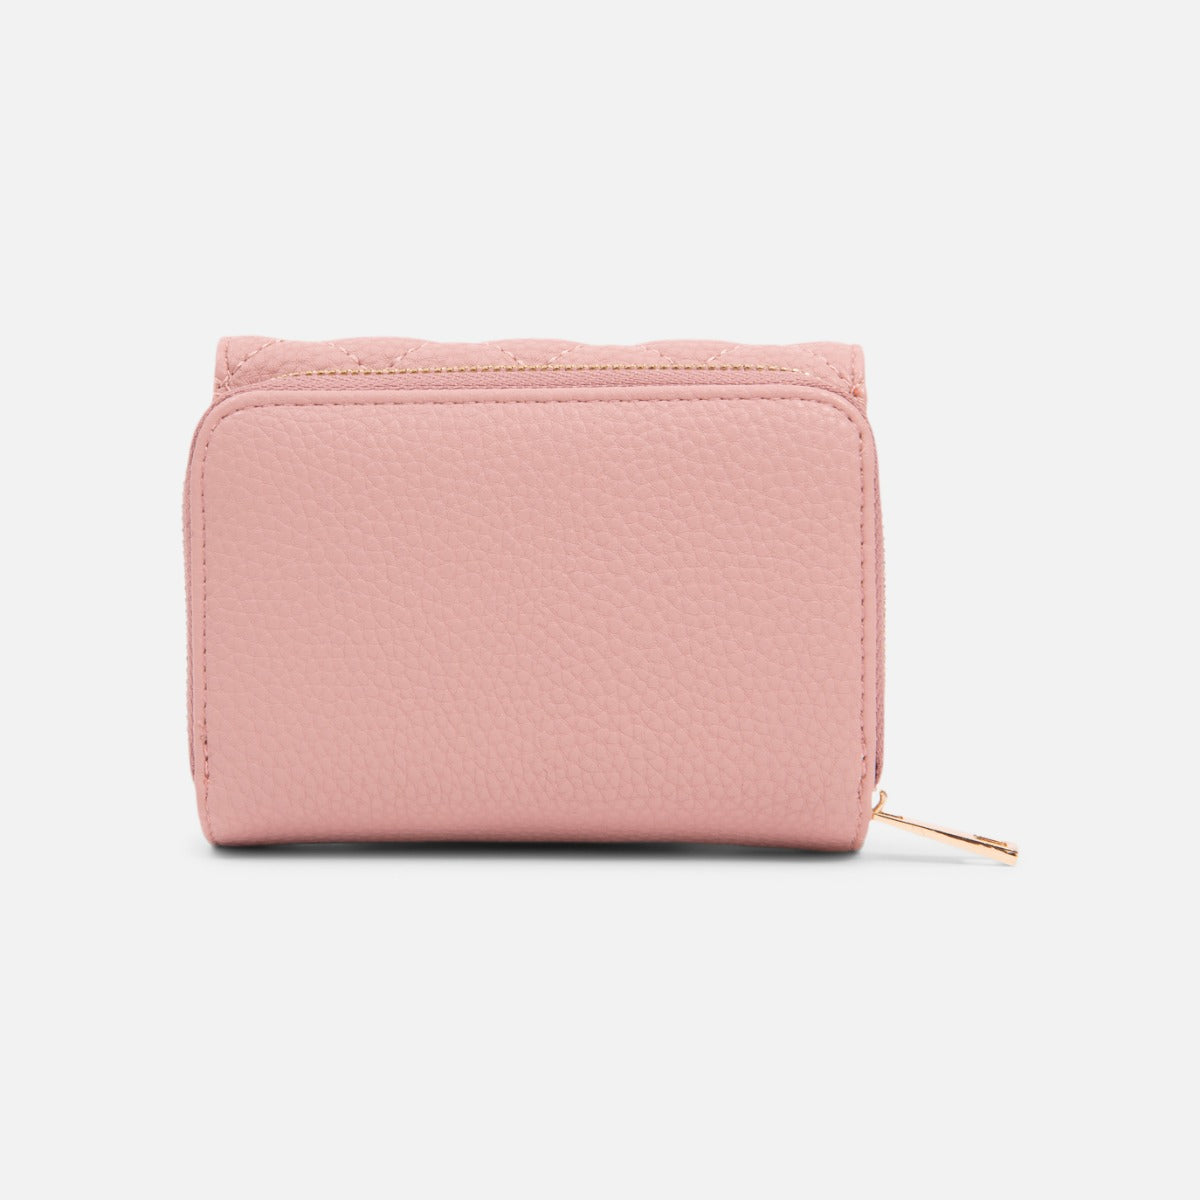 Light pink quilted wallet with gold details